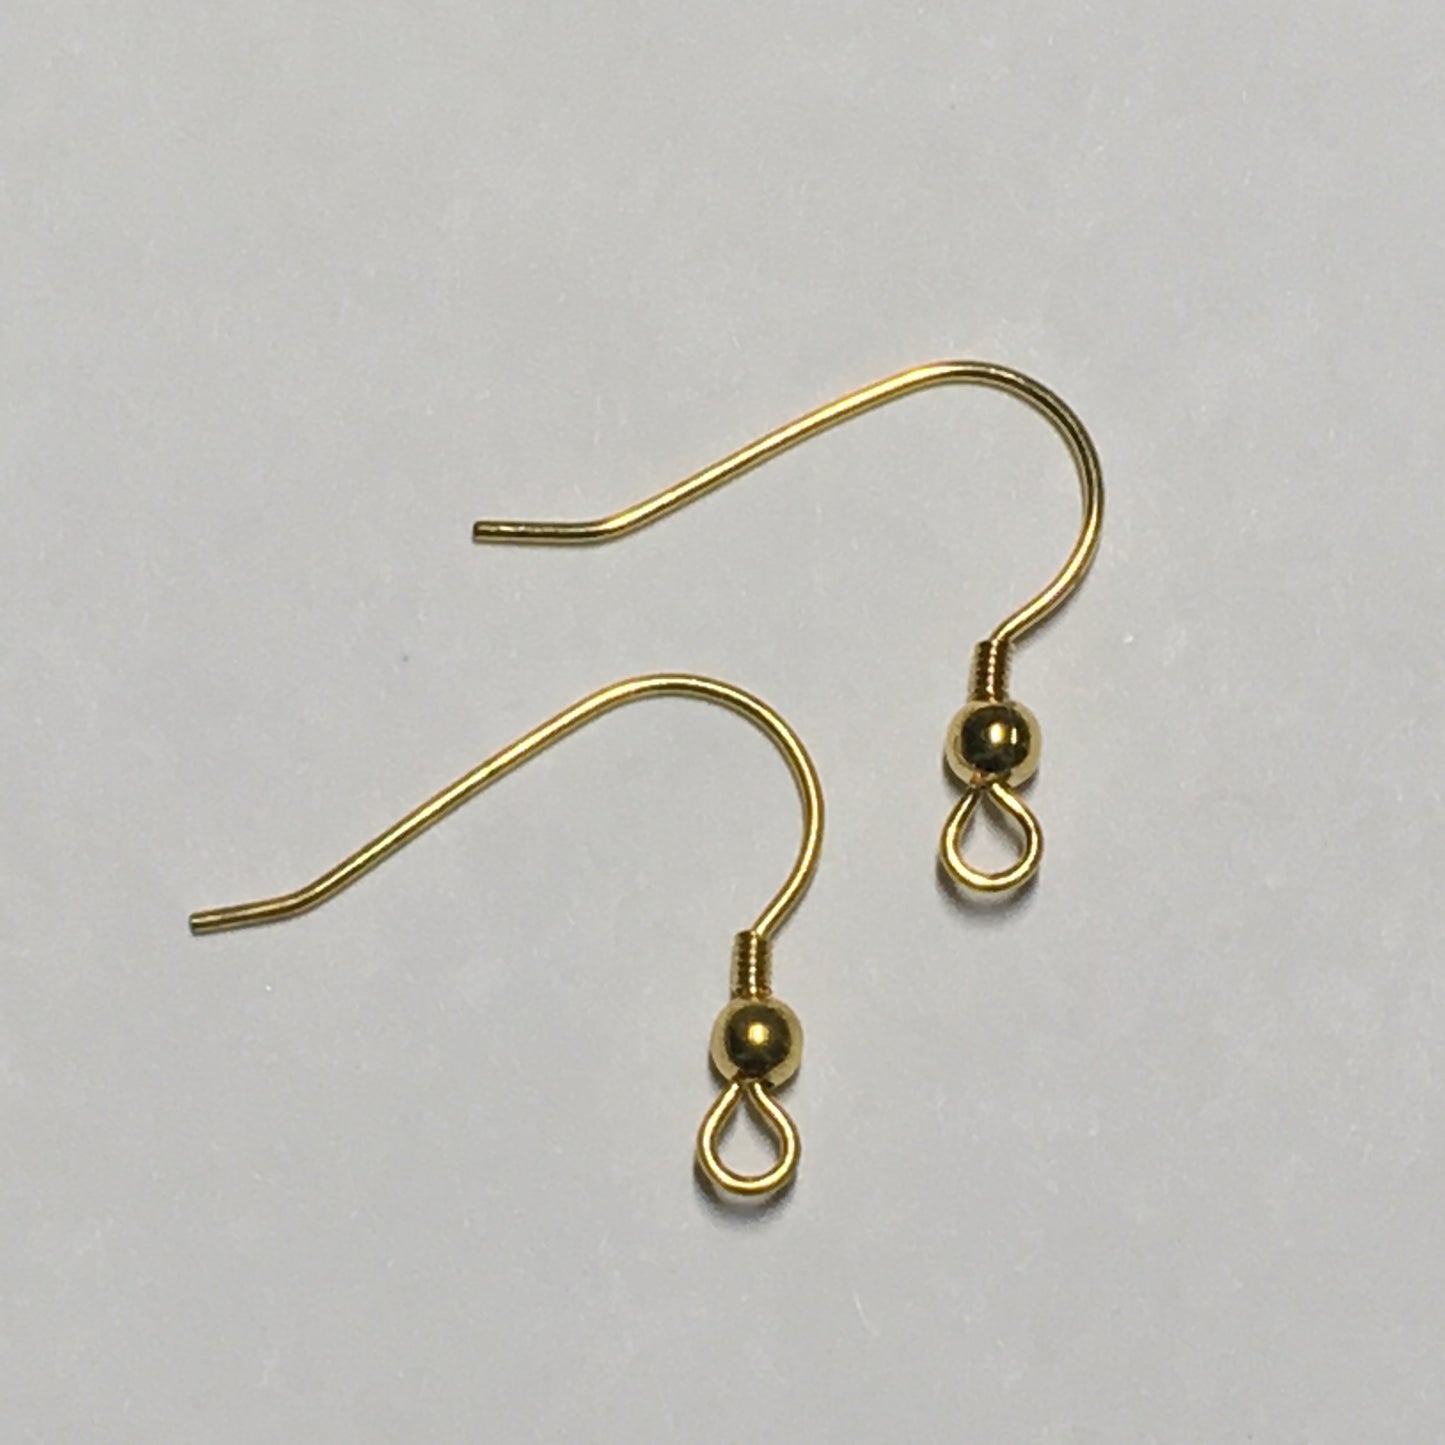 21-Gauge 19 mm Gold French Fish Hook Ear Wires - 1, 5 or 10 Pair